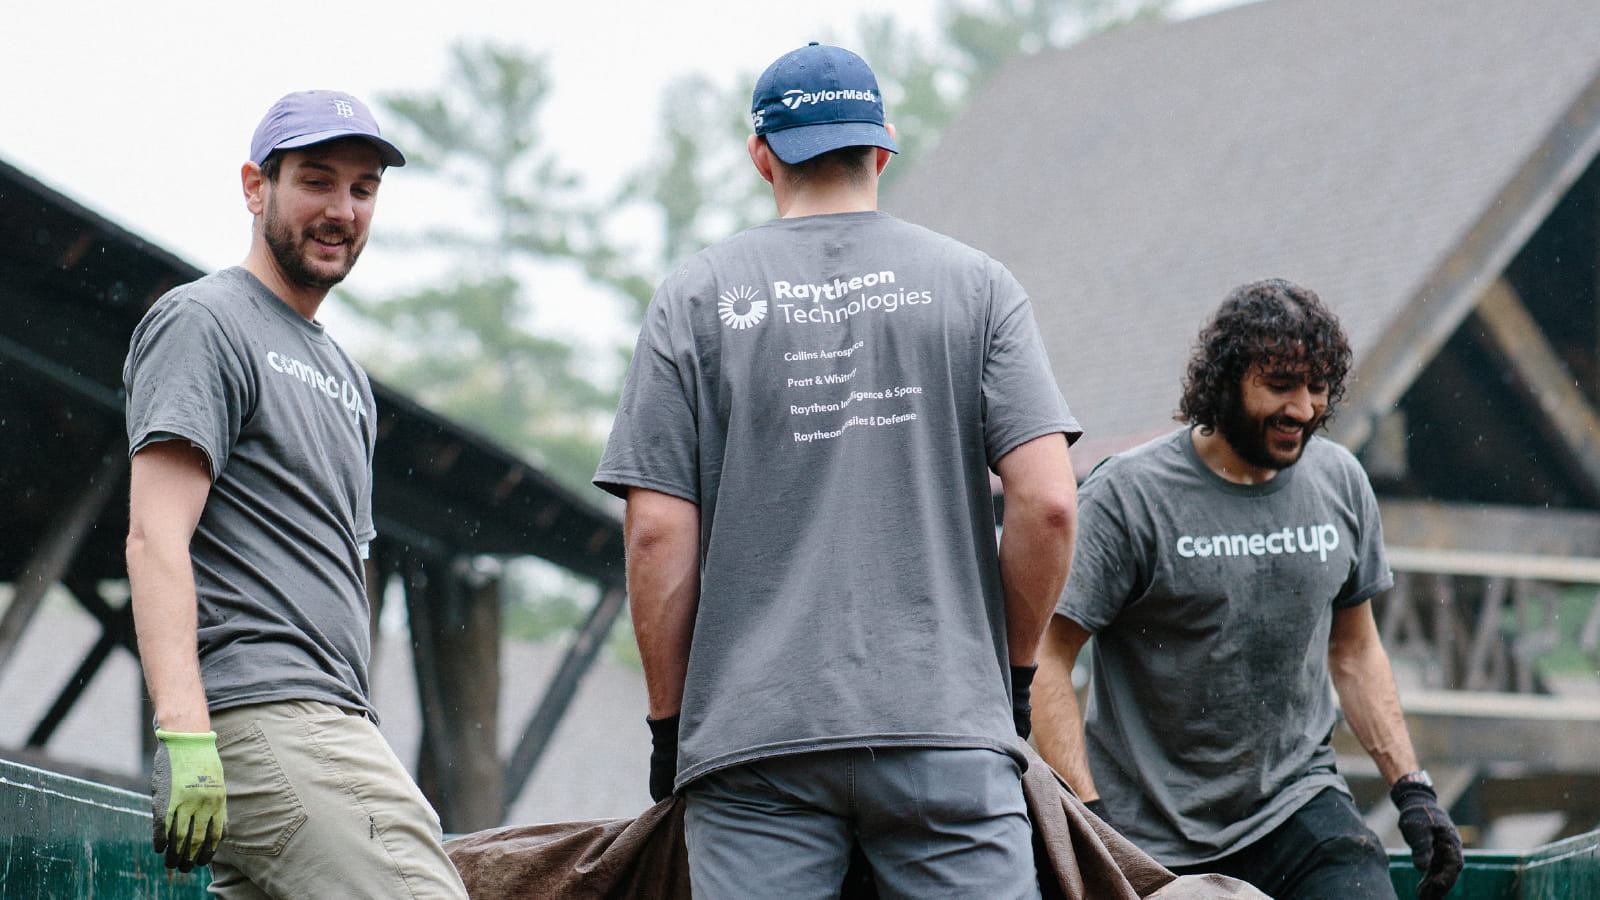 Three male employees volunteering while wearing ConnectUp shirts